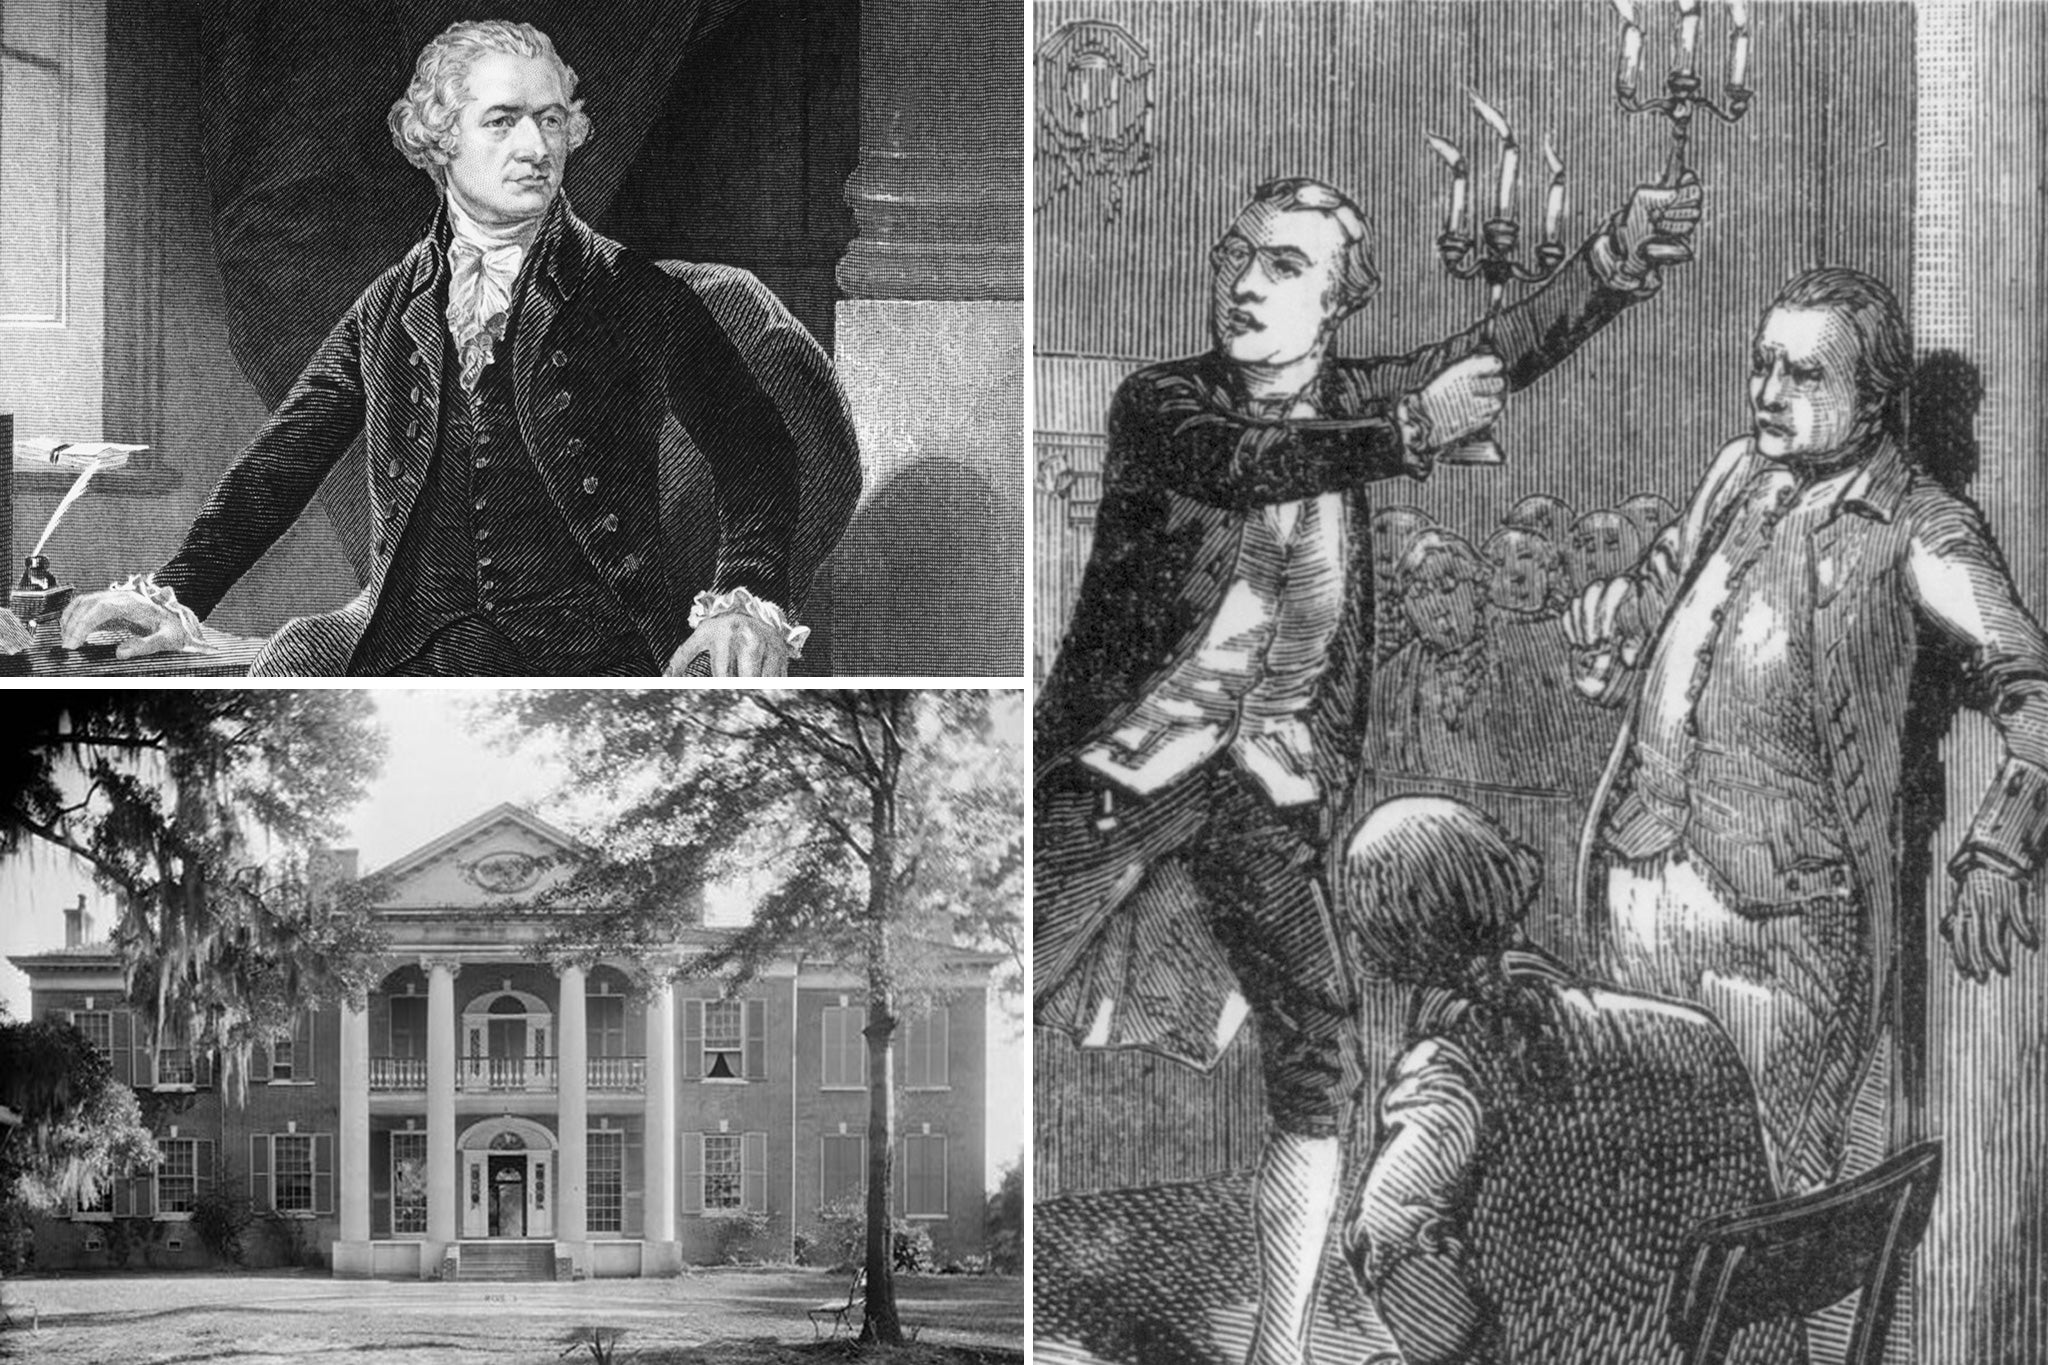 Top left: Alexander Hamilton circa 1790; Bottom left: the Auburn Mansion, designed by Levi Weeks and now a National Historic Landmark; Right: Aaron Burr at the Weeks trial